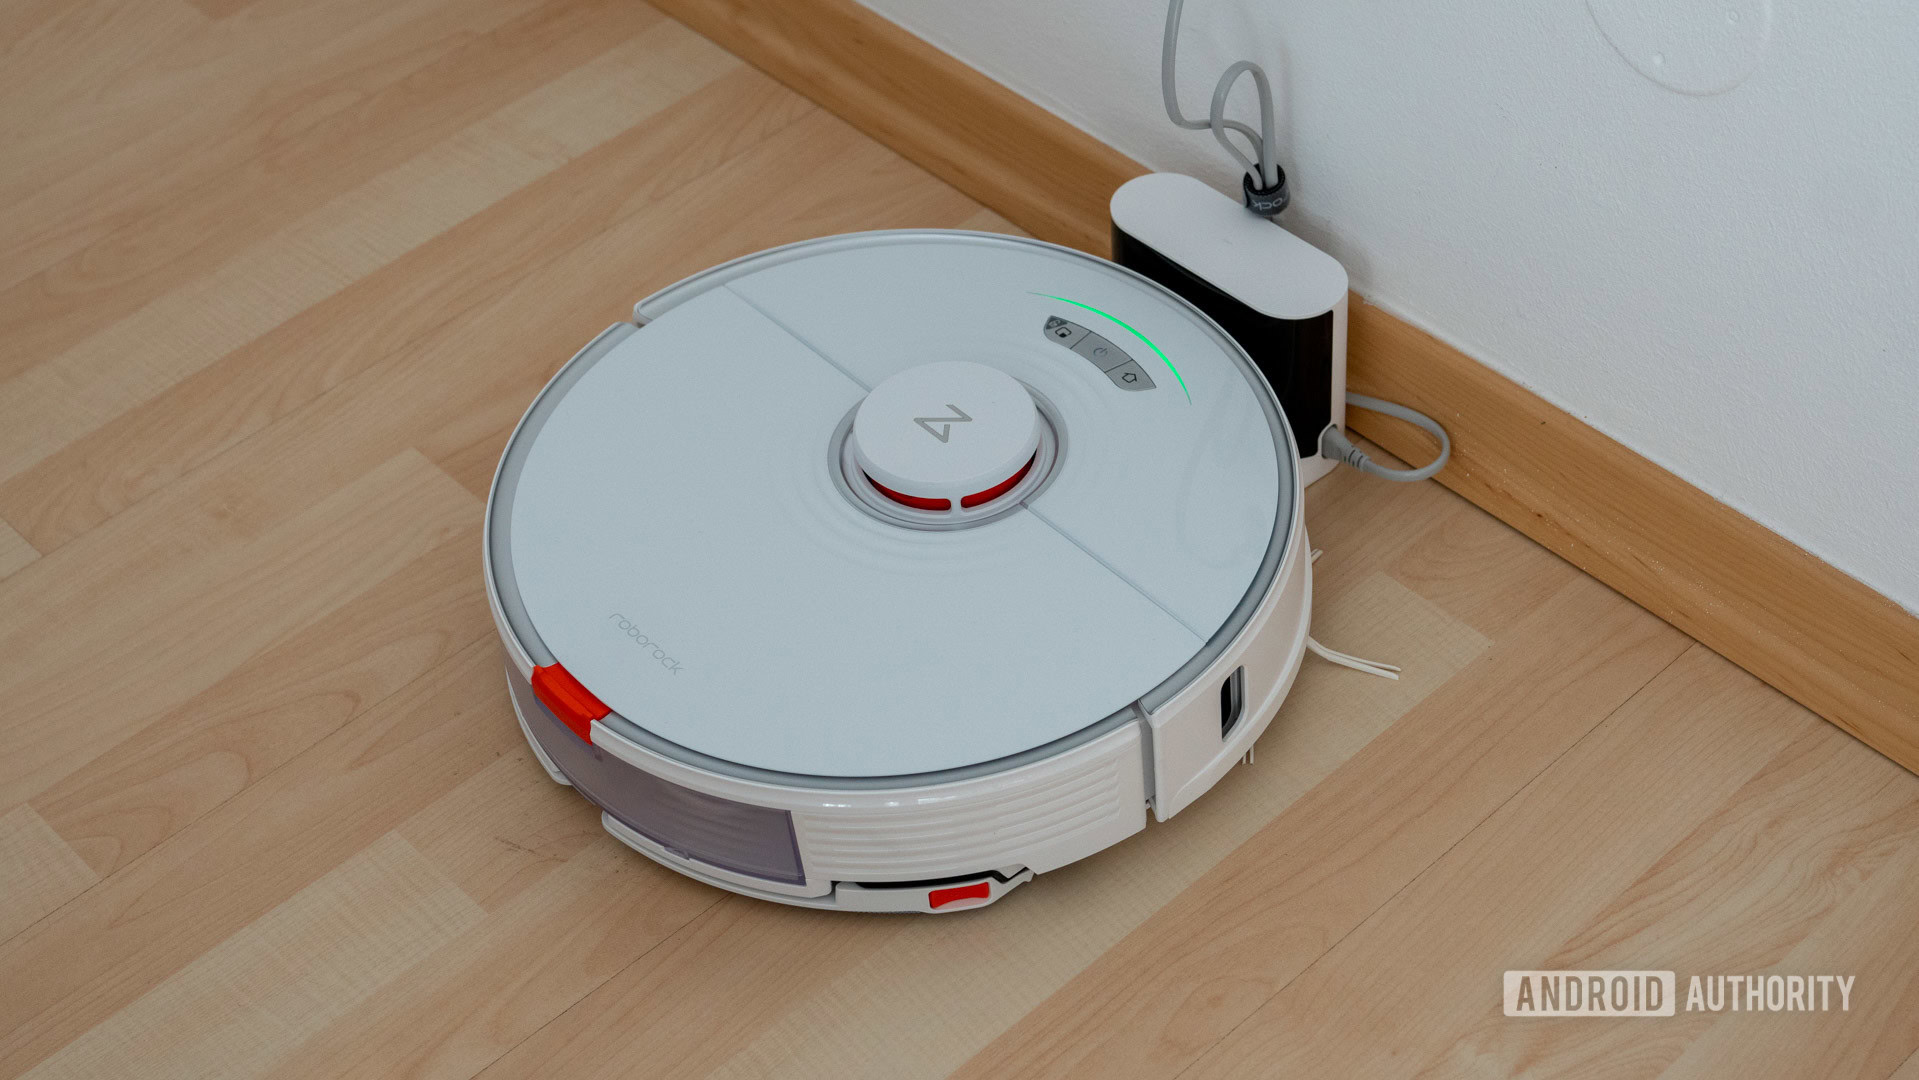 Roborock S7 comes with improved mopping, familiar design -  news